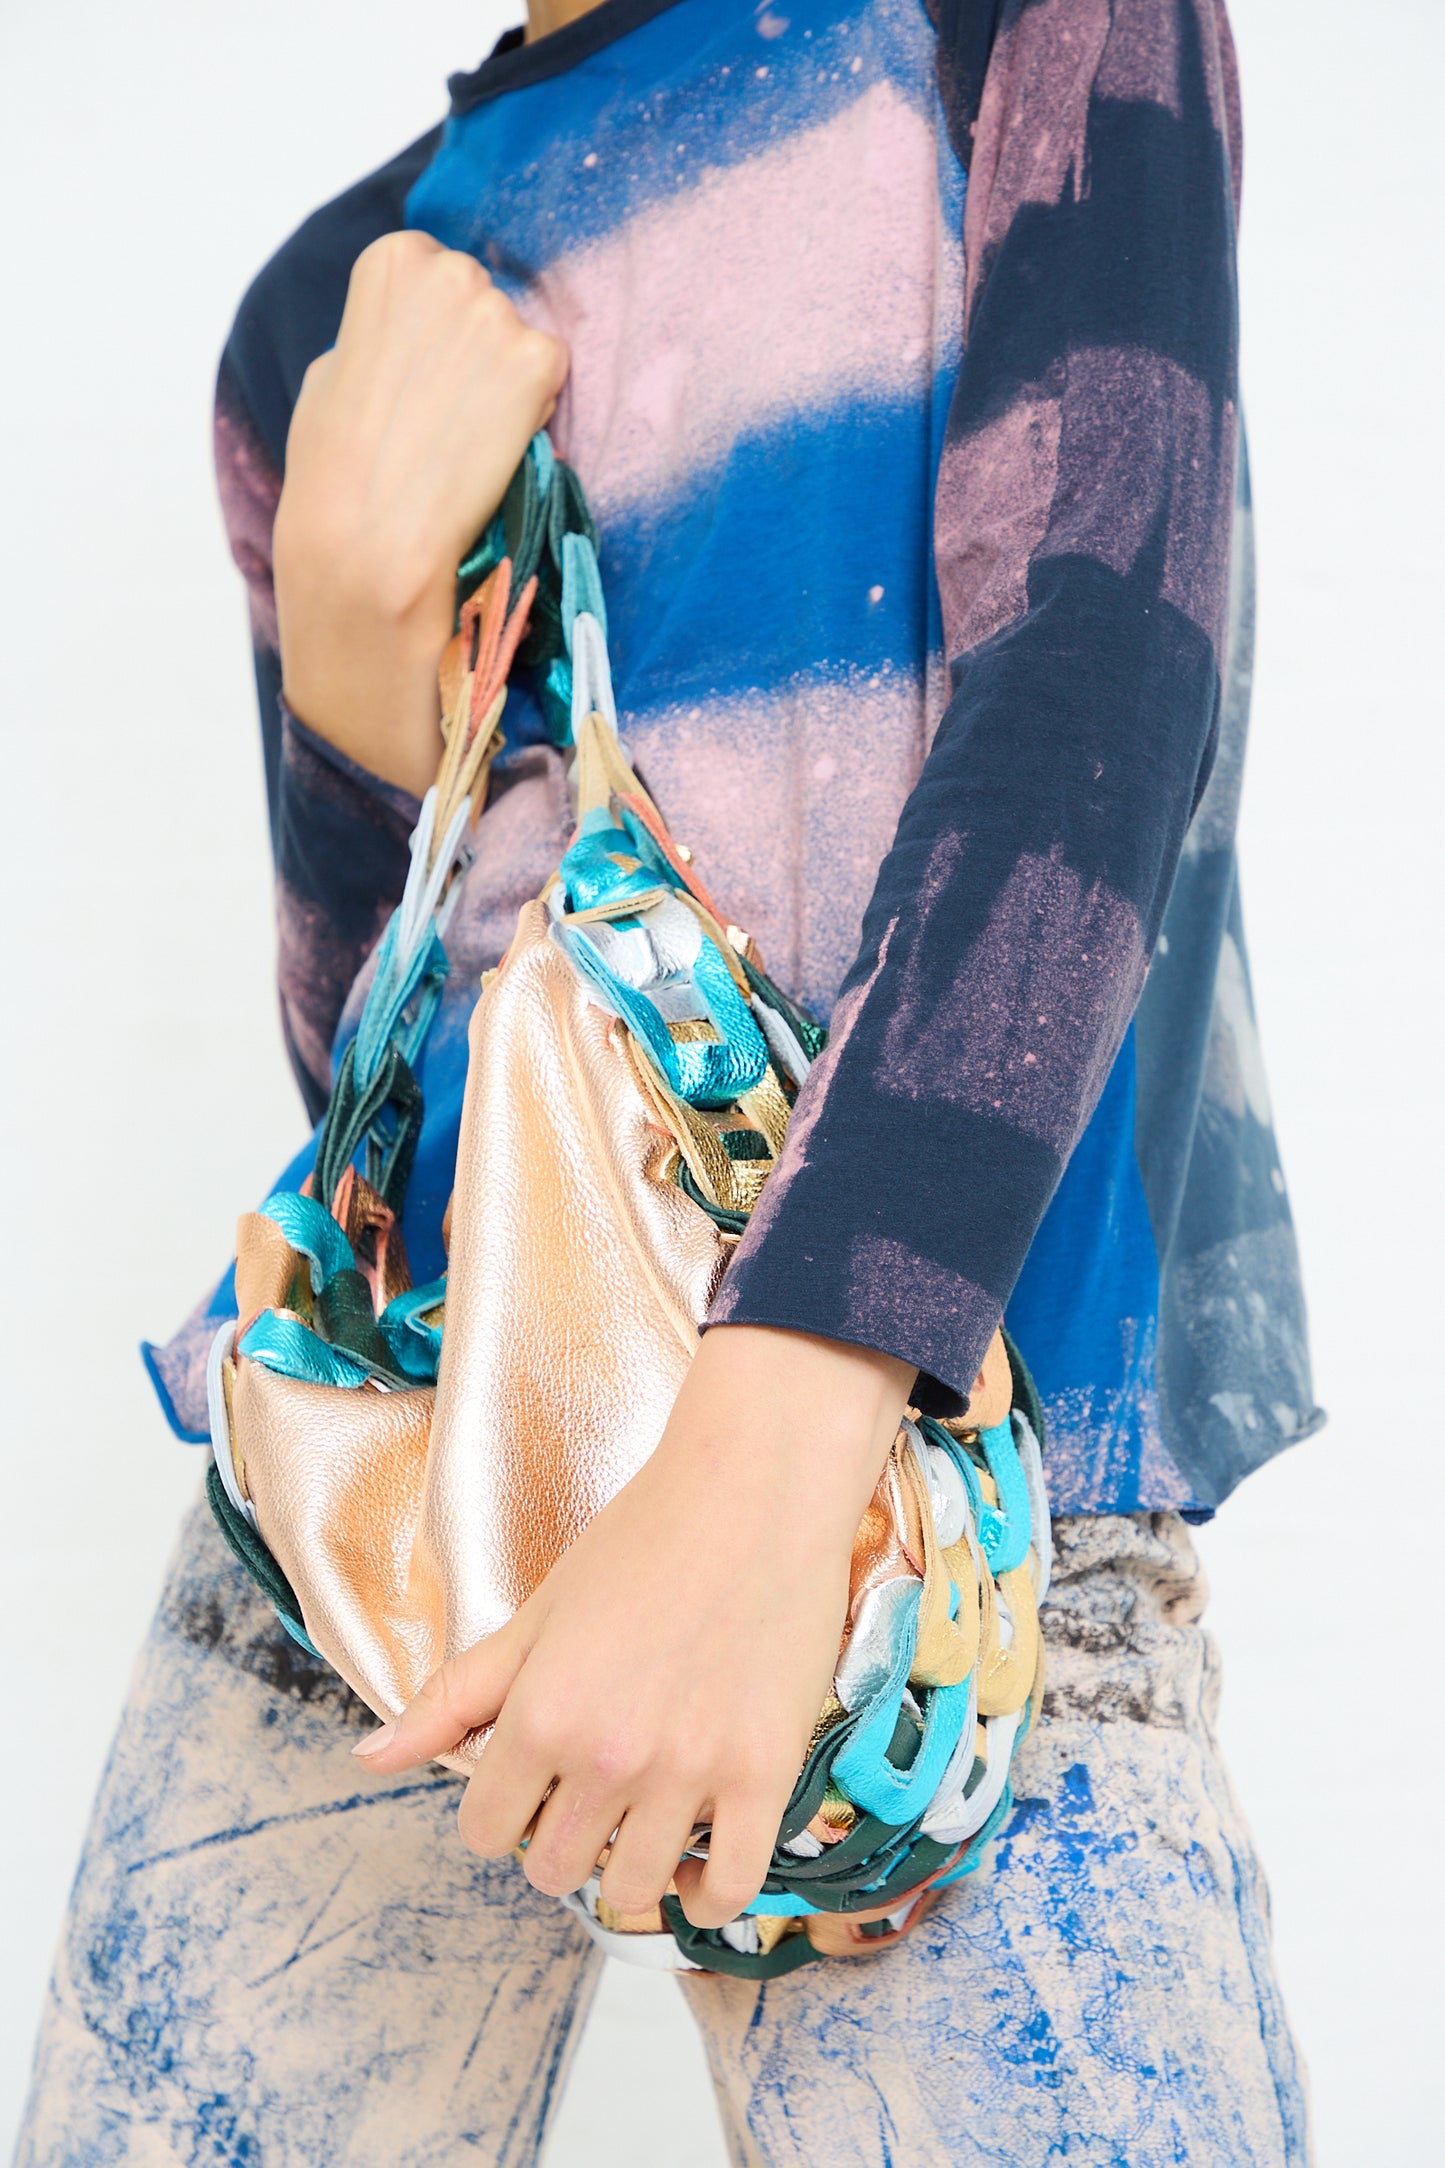 A person holding a shiny, multicolored SC103 Leather Drum Bag in Mineral with a leather links strap, against a backdrop of a cosmic-themed shirt and splattered jeans.